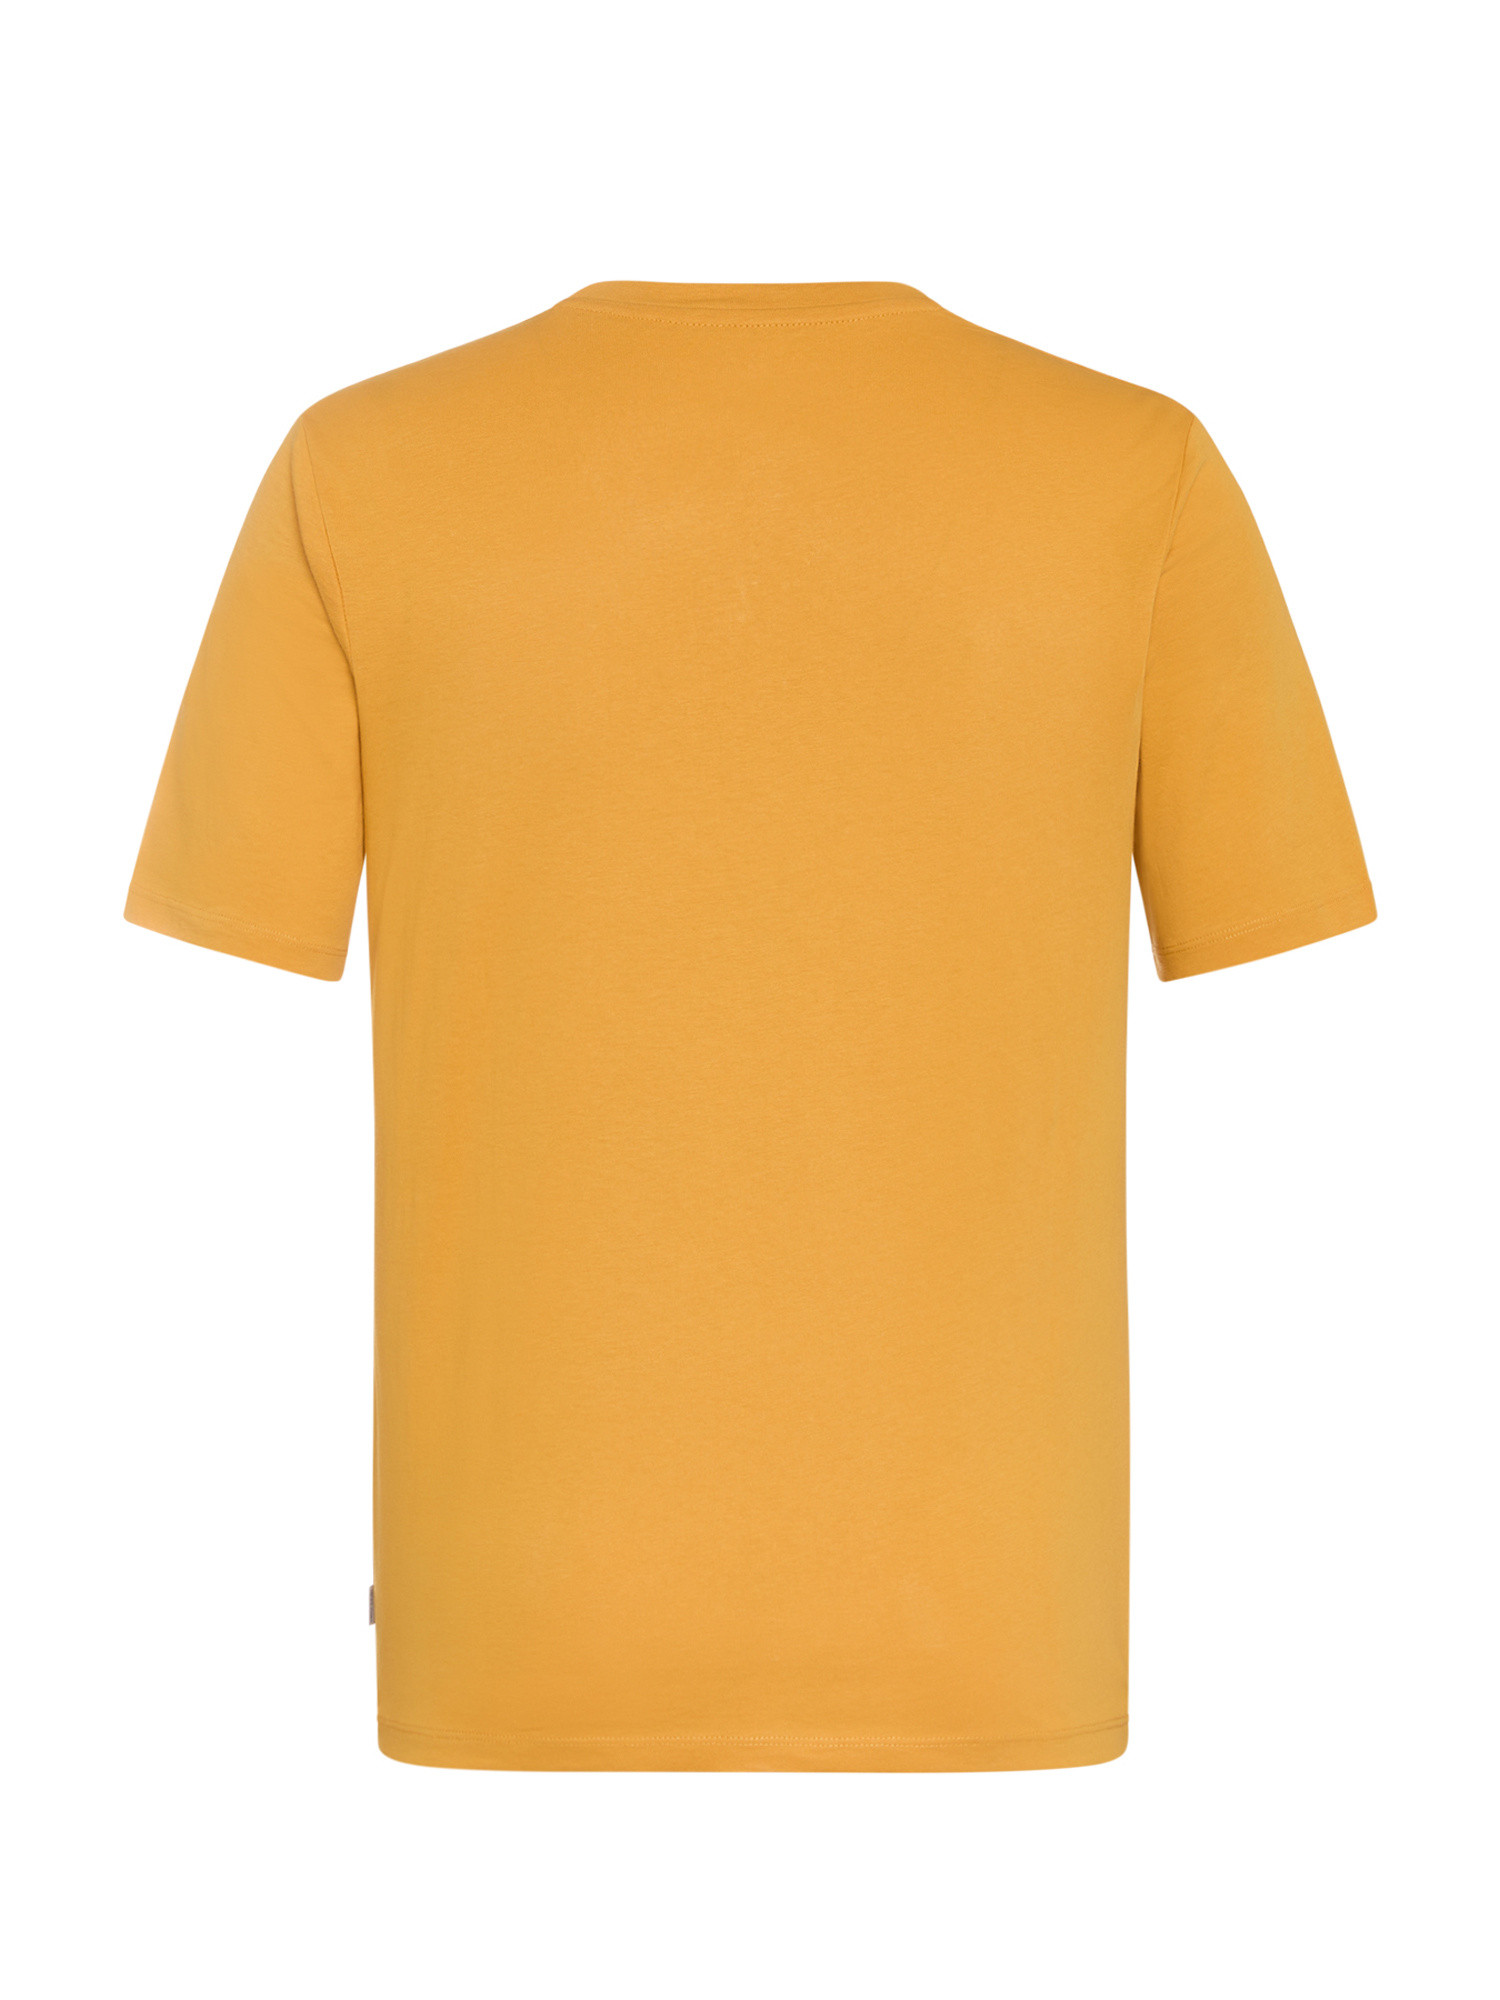 Jack & Jones - T-shirt in cotone, Giallo, large image number 1